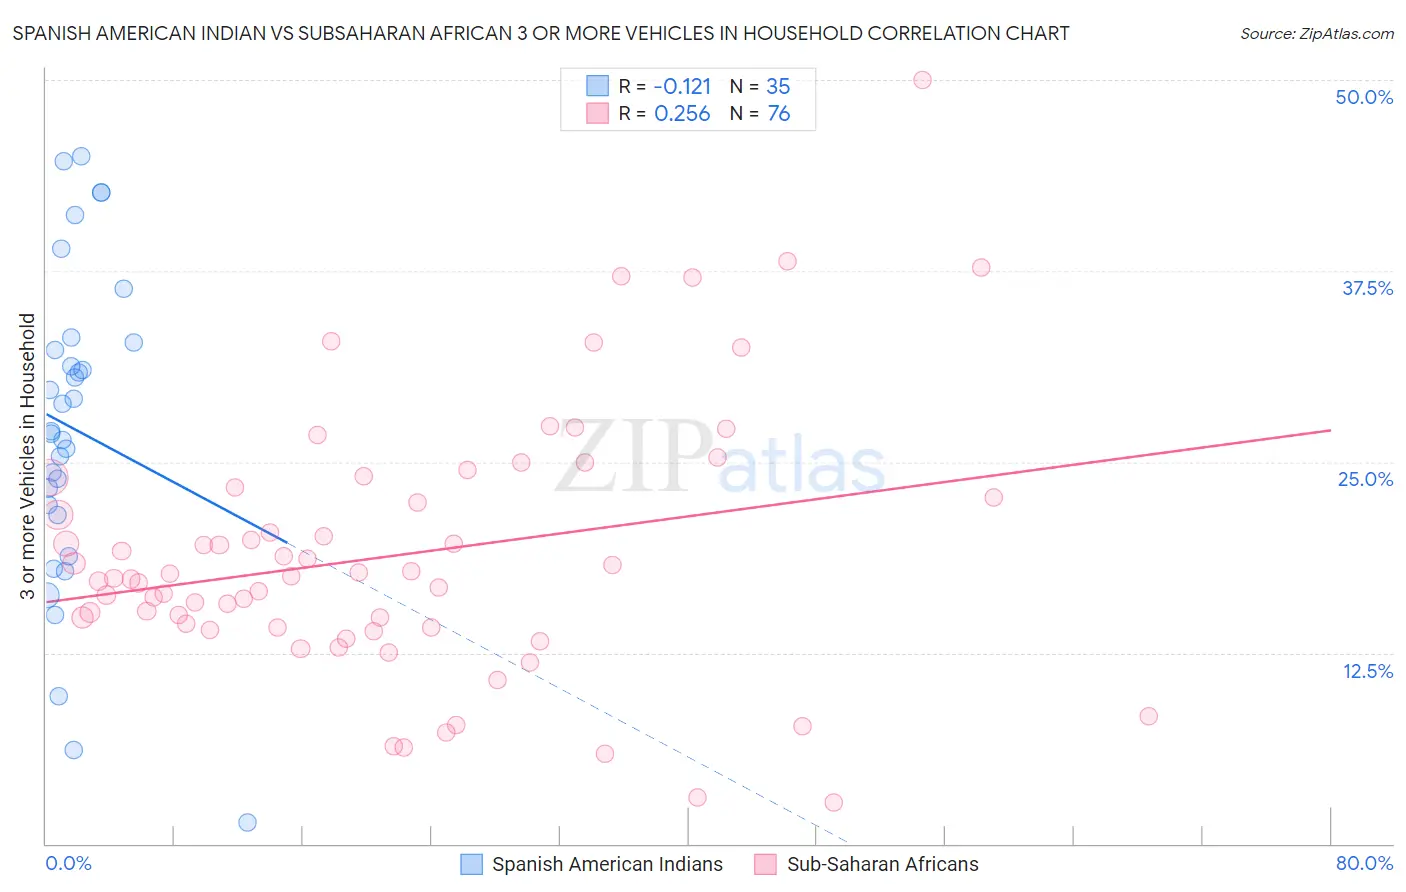 Spanish American Indian vs Subsaharan African 3 or more Vehicles in Household